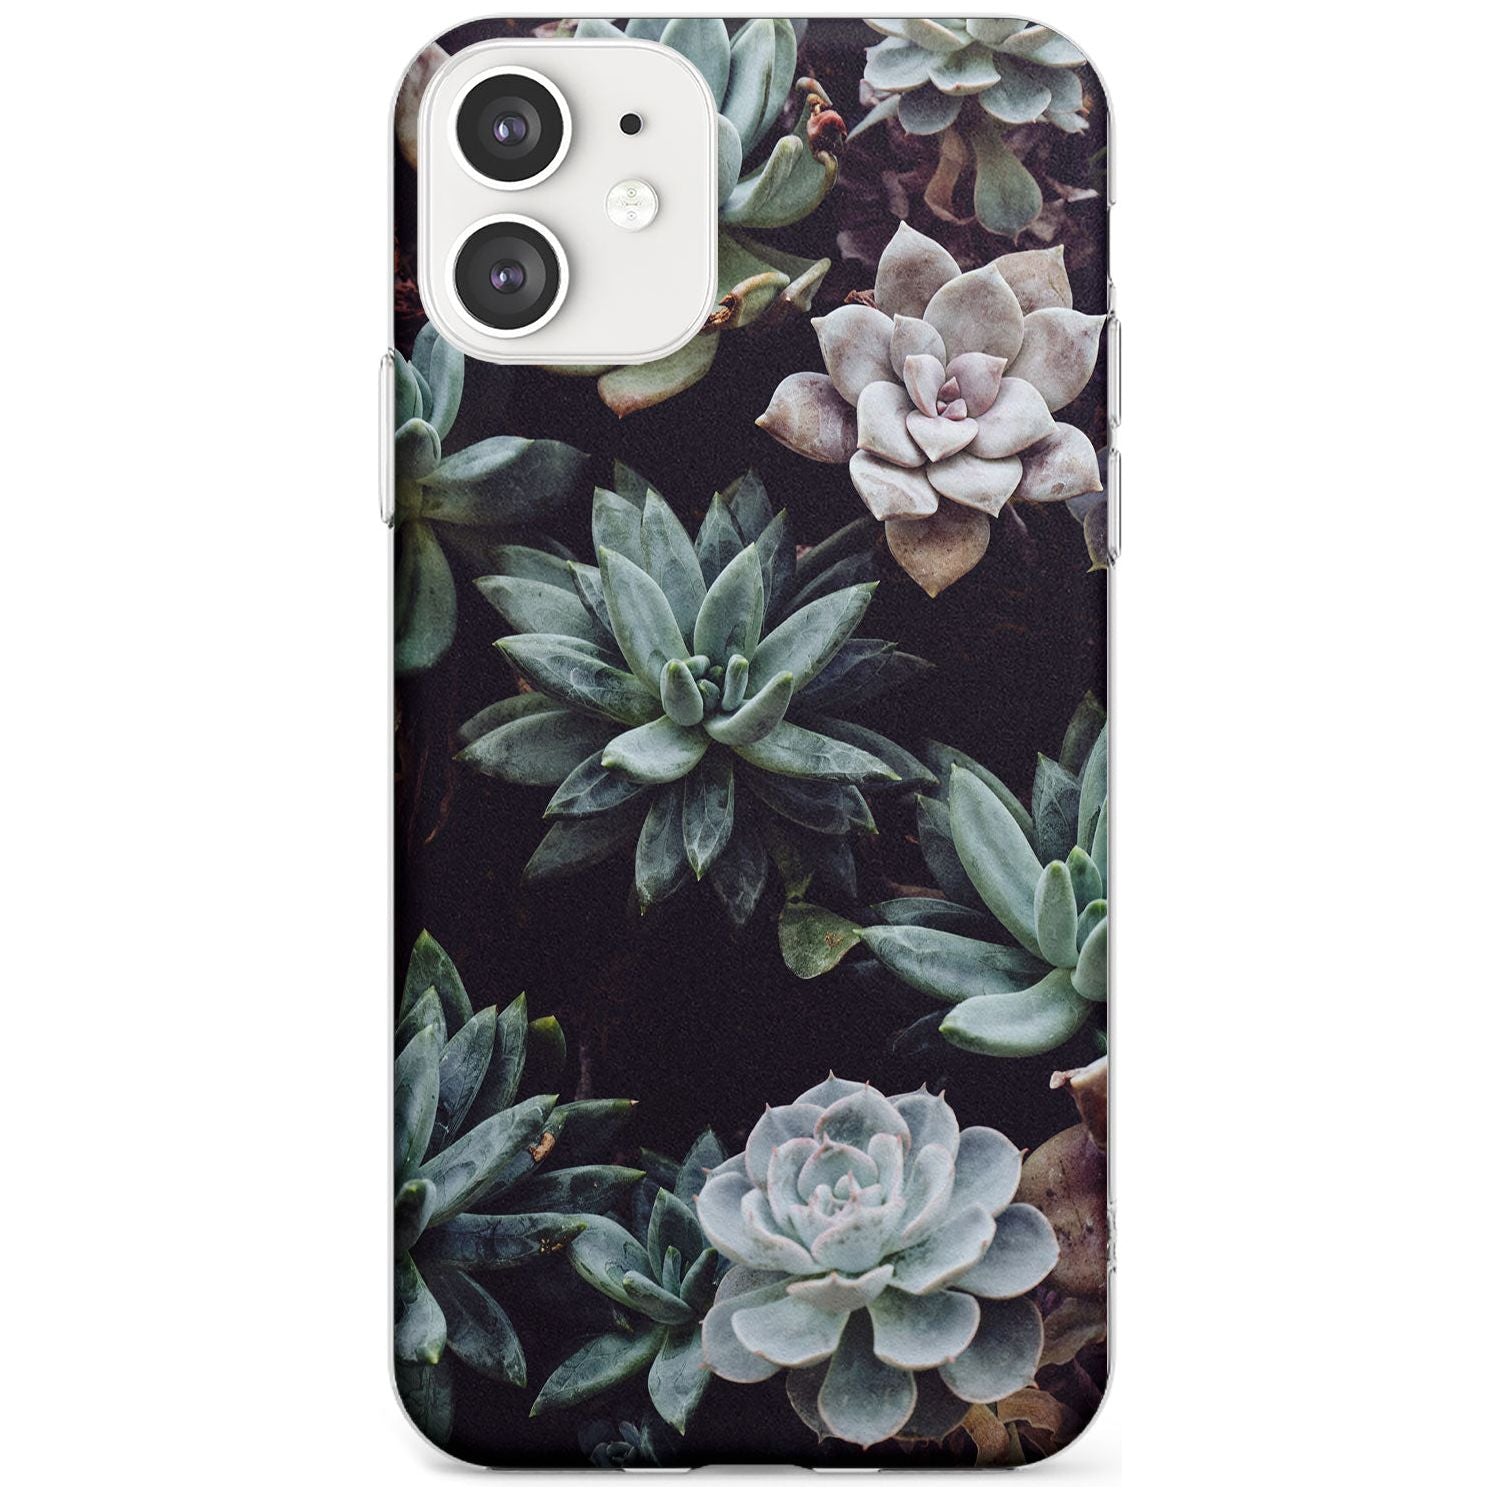 Mixed Succulents - Real Botanical Photographs Slim TPU Phone Case for iPhone 11